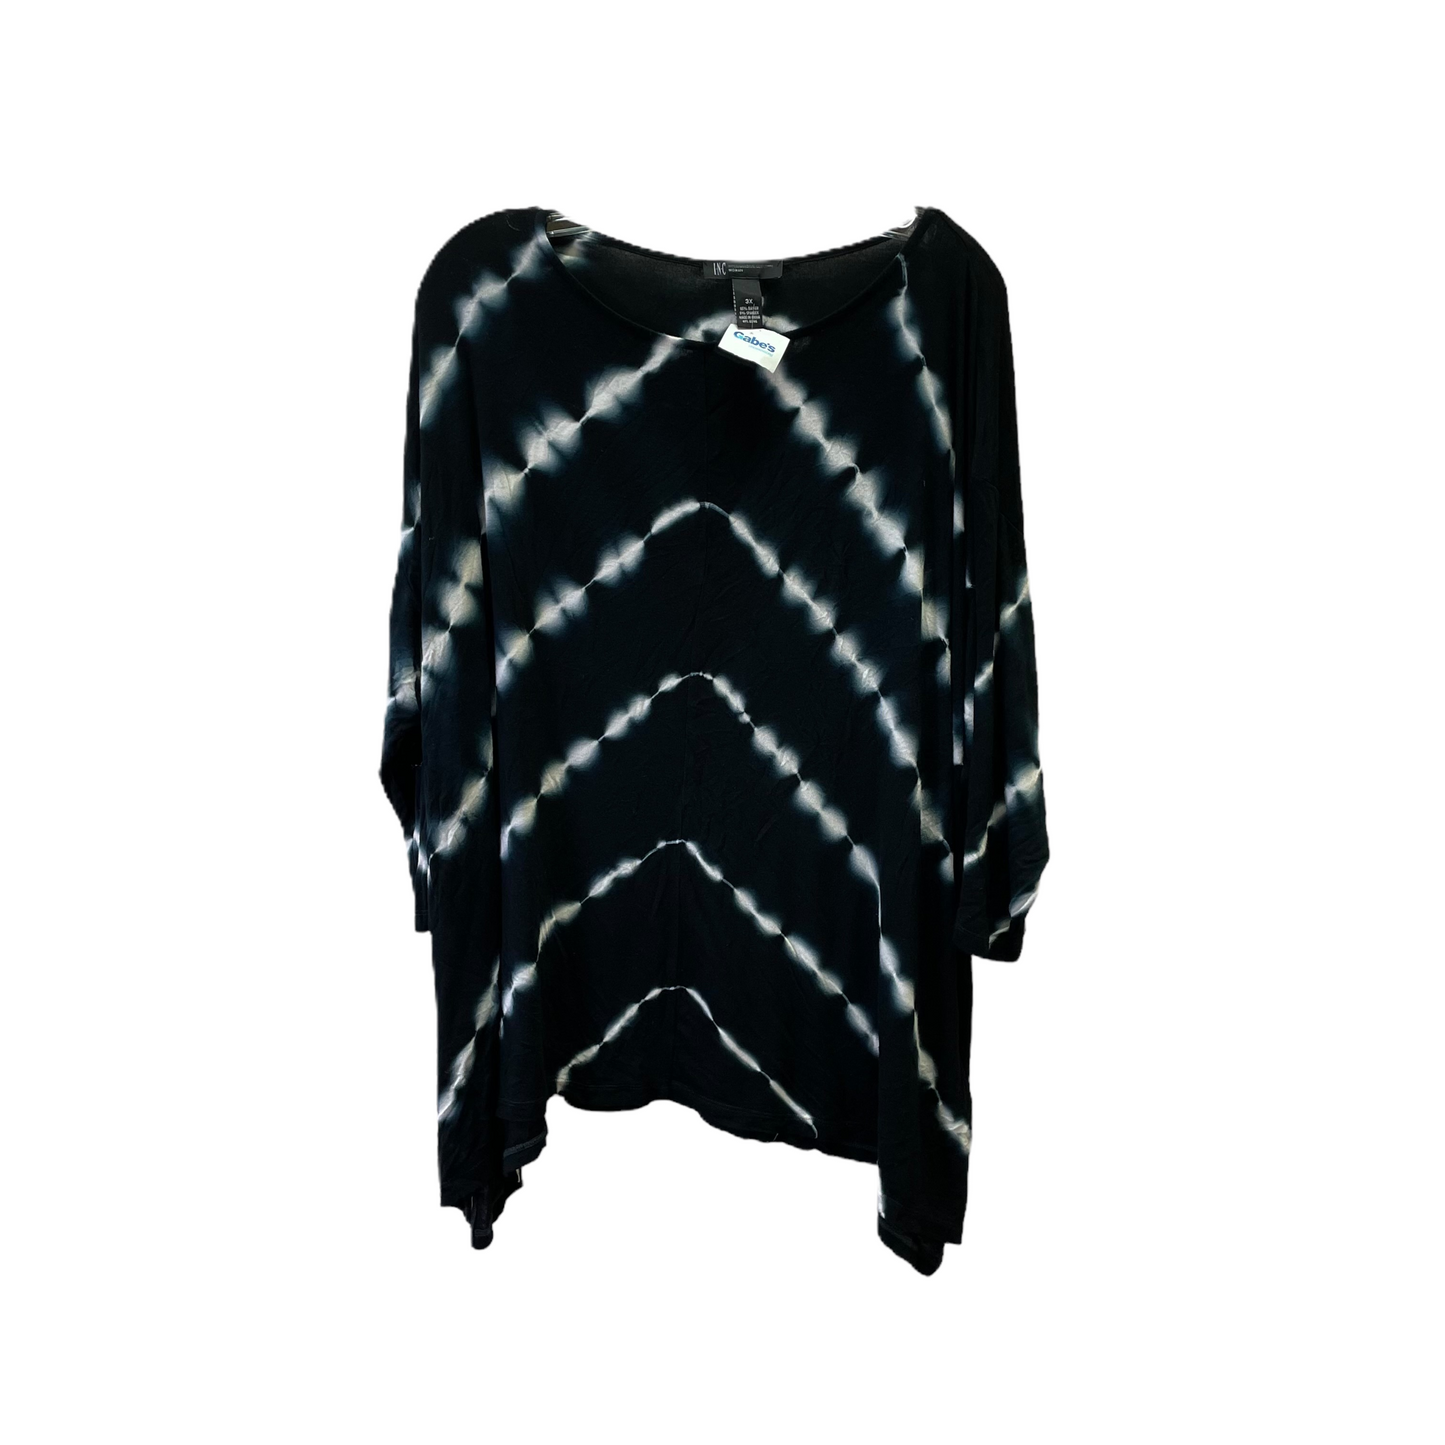 Black & White Top Long Sleeve Basic By Inc, Size: 3x